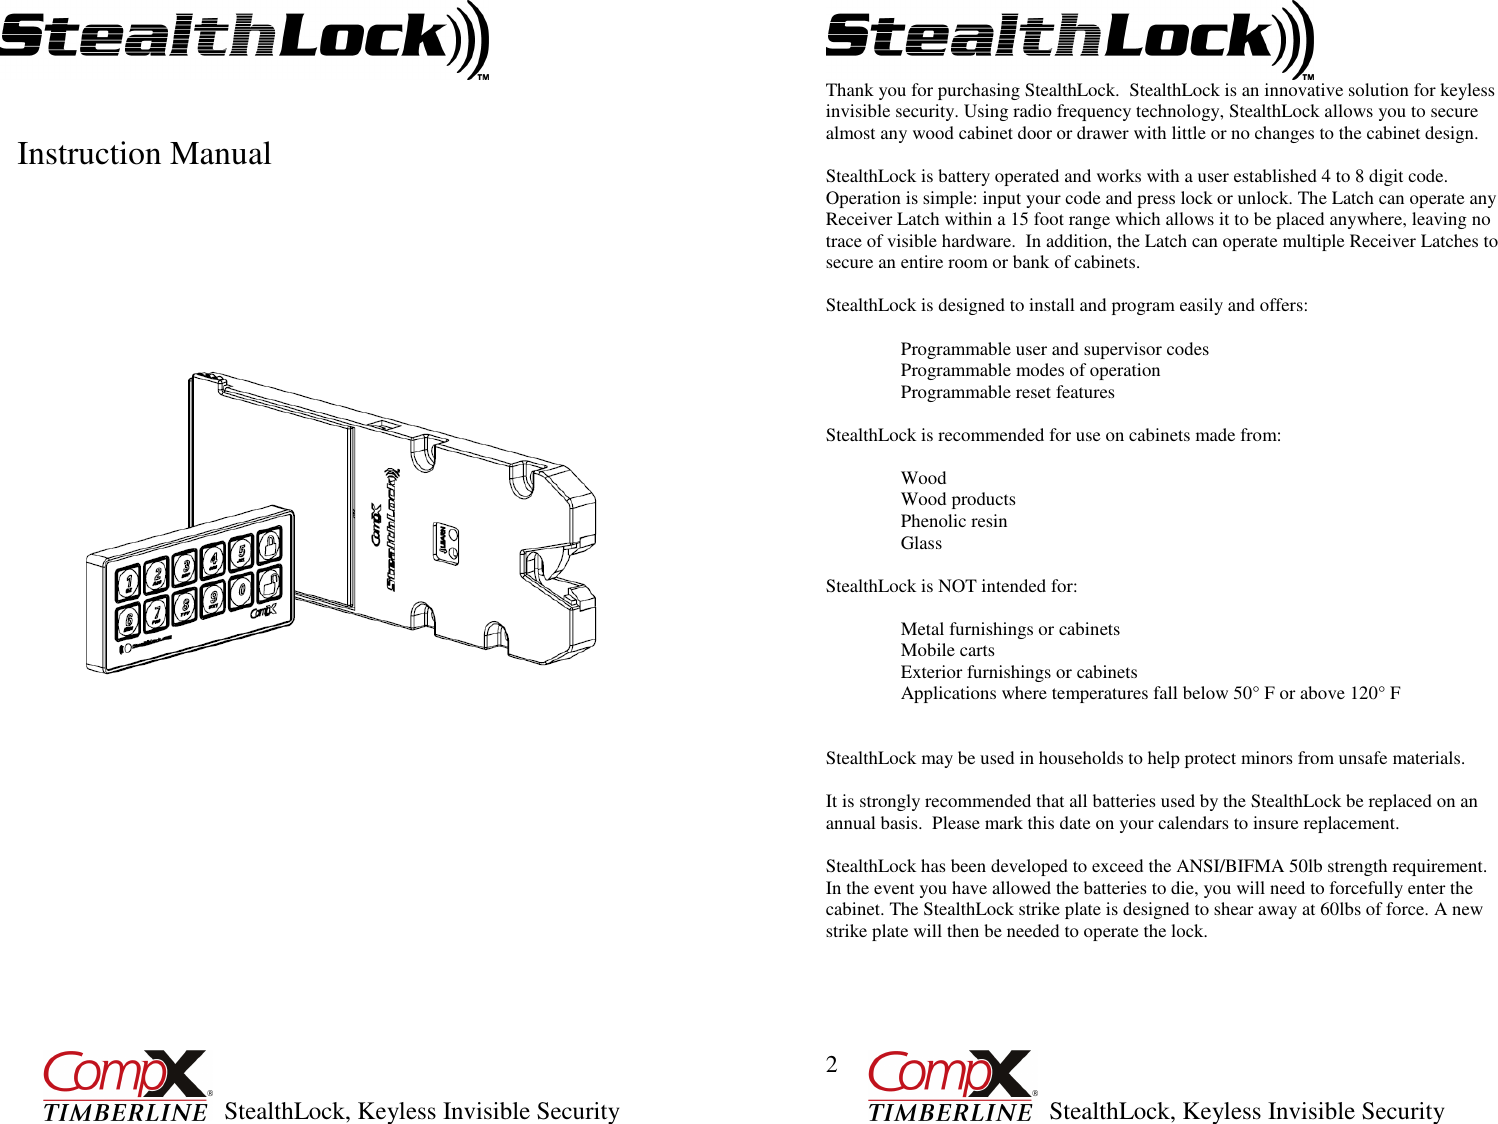         StealthLock, Keyless Invisible Security  1             Instruction Manual                                                            StealthLock, Keyless Invisible Security  2 Thank you for purchasing StealthLock.  StealthLock is an innovative solution for keyless invisible security. Using radio frequency technology, StealthLock allows you to secure almost any wood cabinet door or drawer with little or no changes to the cabinet design.    StealthLock is battery operated and works with a user established 4 to 8 digit code. Operation is simple: input your code and press lock or unlock. The Latch can operate any Receiver Latch within a 15 foot range which allows it to be placed anywhere, leaving no trace of visible hardware.  In addition, the Latch can operate multiple Receiver Latches to secure an entire room or bank of cabinets.      StealthLock is designed to install and program easily and offers:    Programmable user and supervisor codes    Programmable modes of operation    Programmable reset features   StealthLock is recommended for use on cabinets made from:  Wood Wood products Phenolic resin Glass  StealthLock is NOT intended for:    Metal furnishings or cabinets   Mobile carts    Exterior furnishings or cabinets   Applications where temperatures fall below 50° F or above 120° F     StealthLock may be used in households to help protect minors from unsafe materials.  It is strongly recommended that all batteries used by the StealthLock be replaced on an annual basis.  Please mark this date on your calendars to insure replacement.  StealthLock has been developed to exceed the ANSI/BIFMA 50lb strength requirement.  In the event you have allowed the batteries to die, you will need to forcefully enter the cabinet. The StealthLock strike plate is designed to shear away at 60lbs of force. A new strike plate will then be needed to operate the lock.     